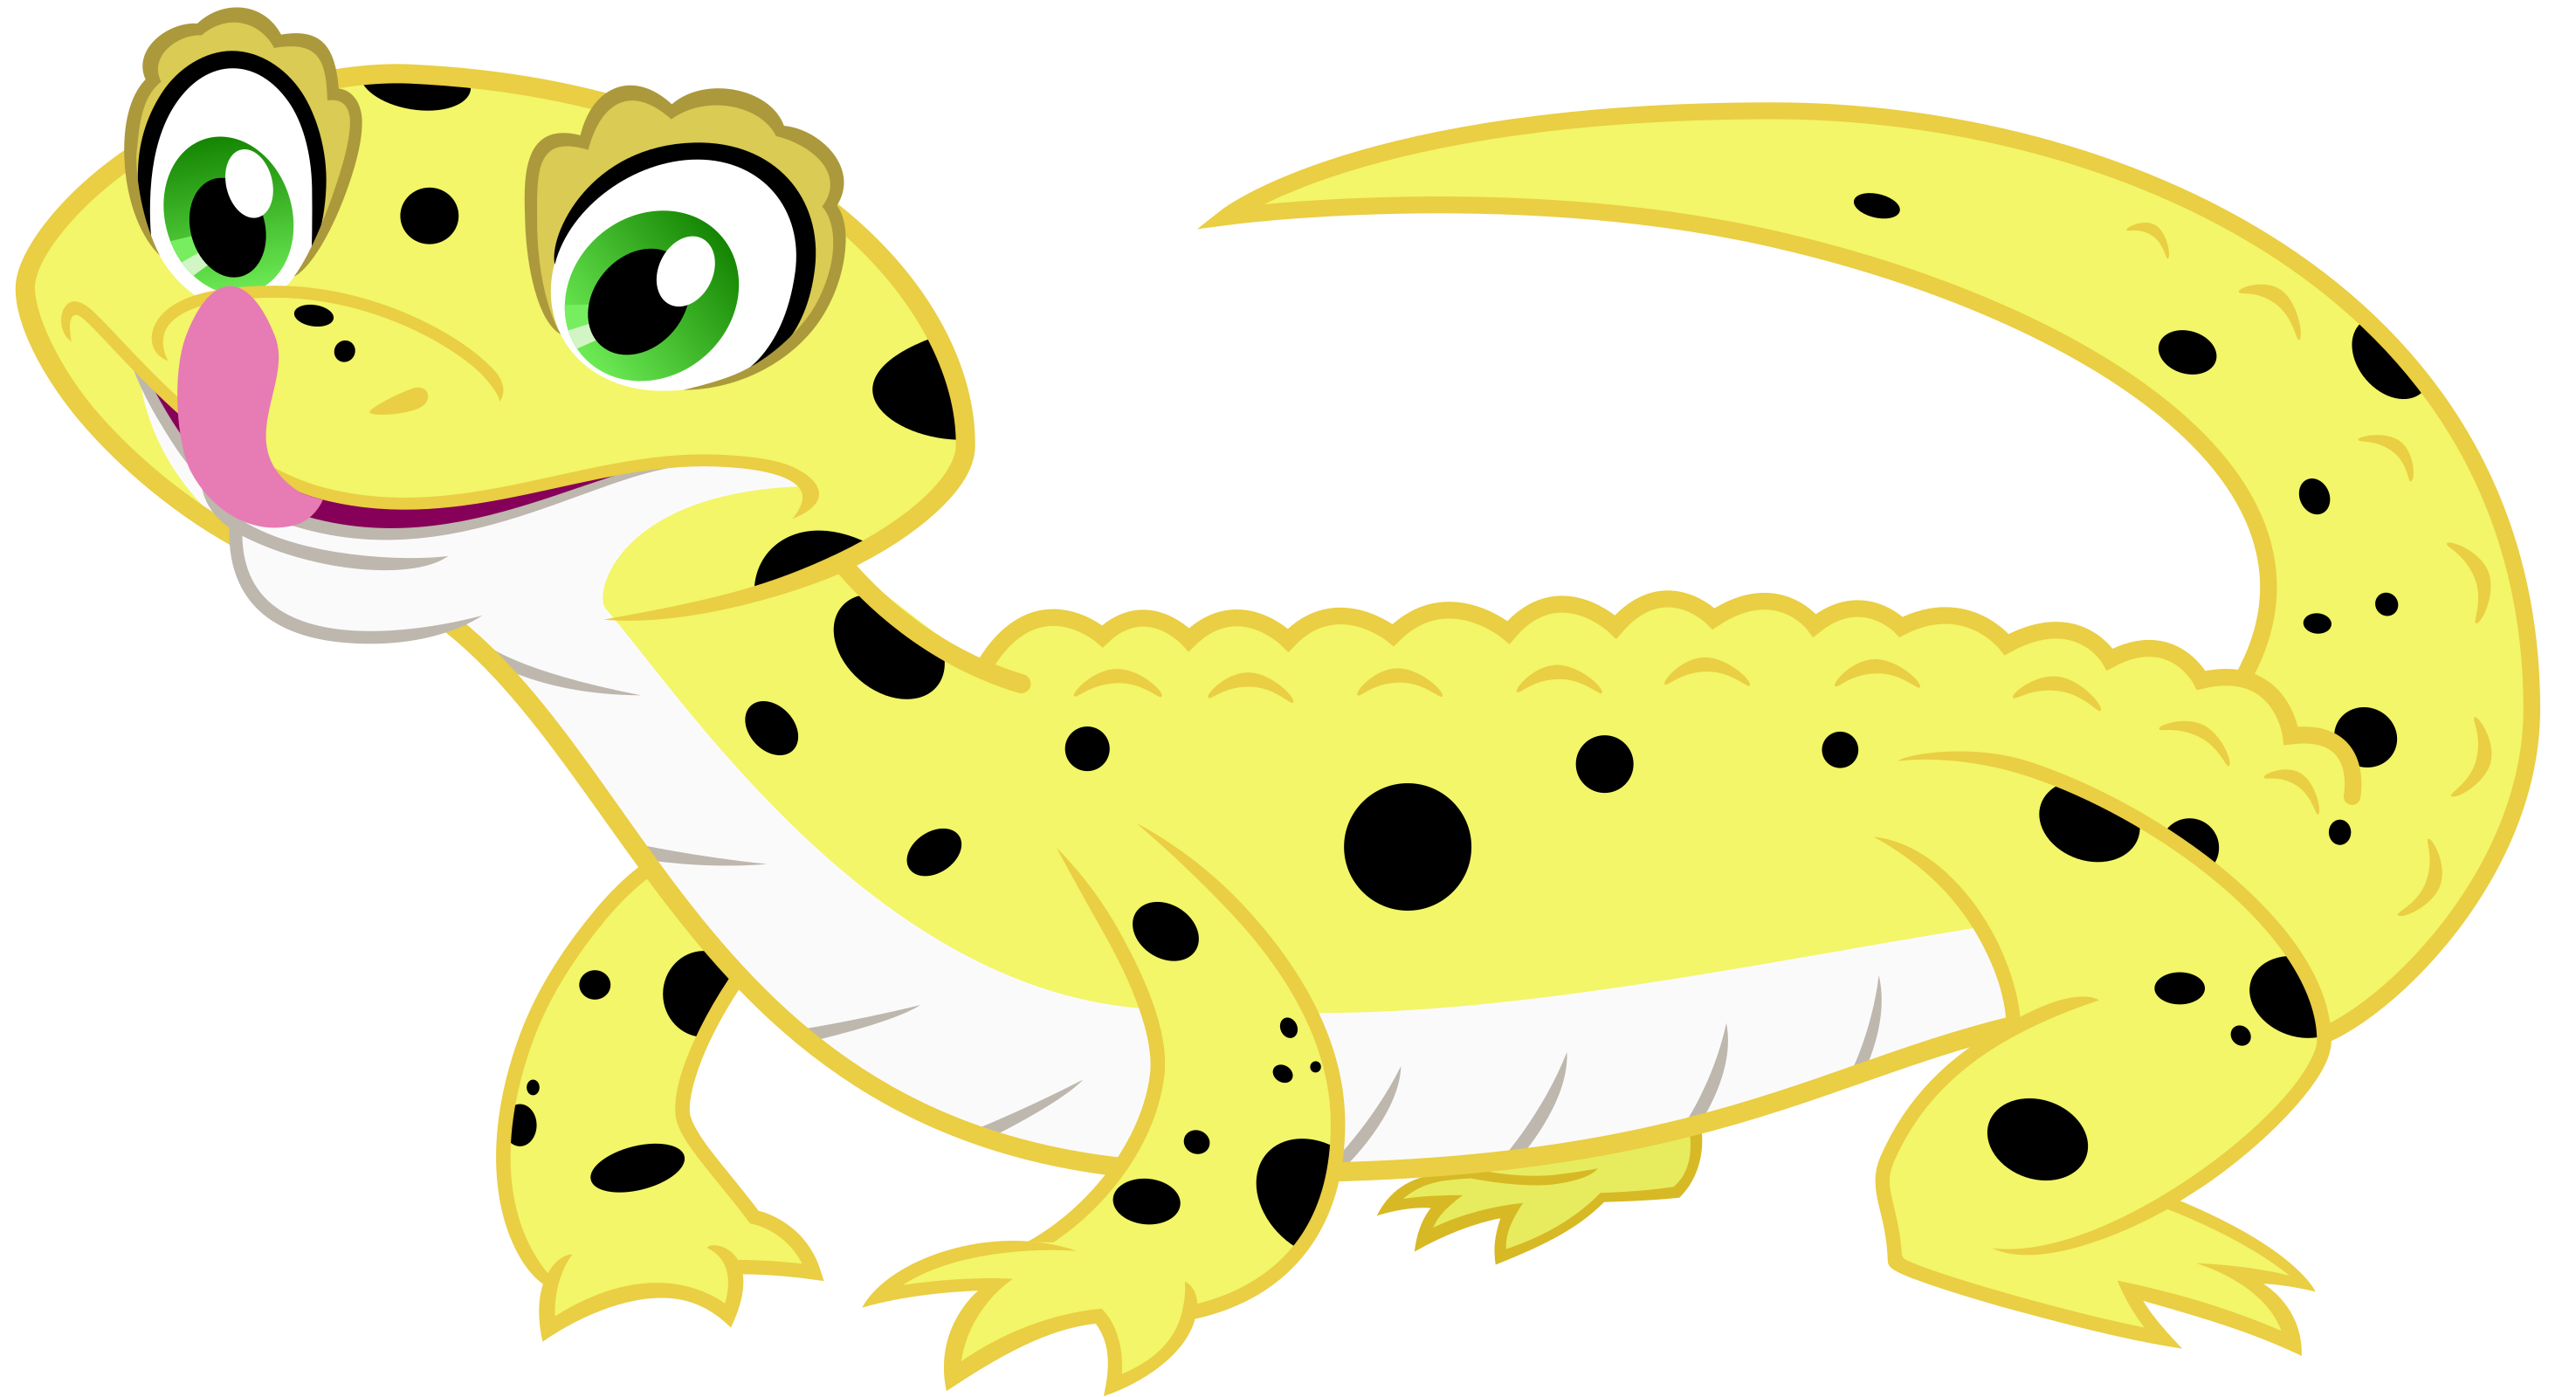 Gecko clipart easy, Gecko easy Transparent FREE for download on